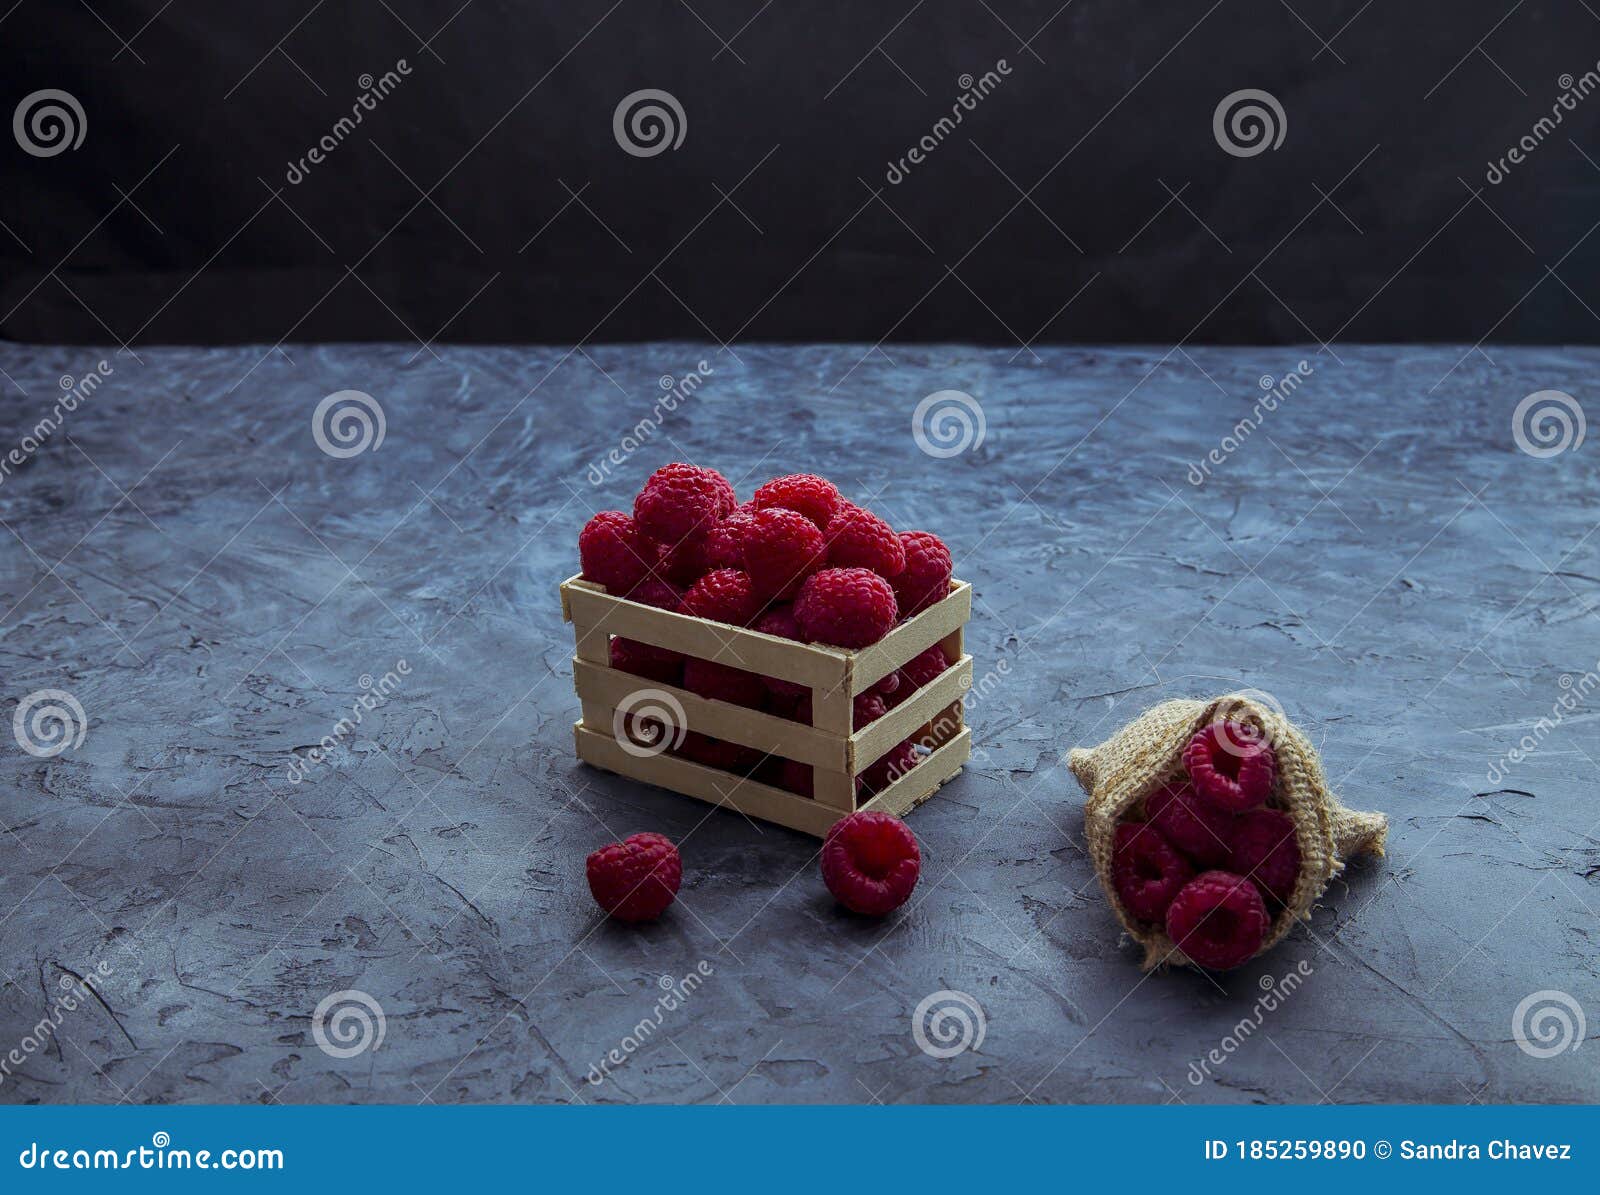 raspberries in red color in a small wooden box and with a jute sack filled with the same fruit